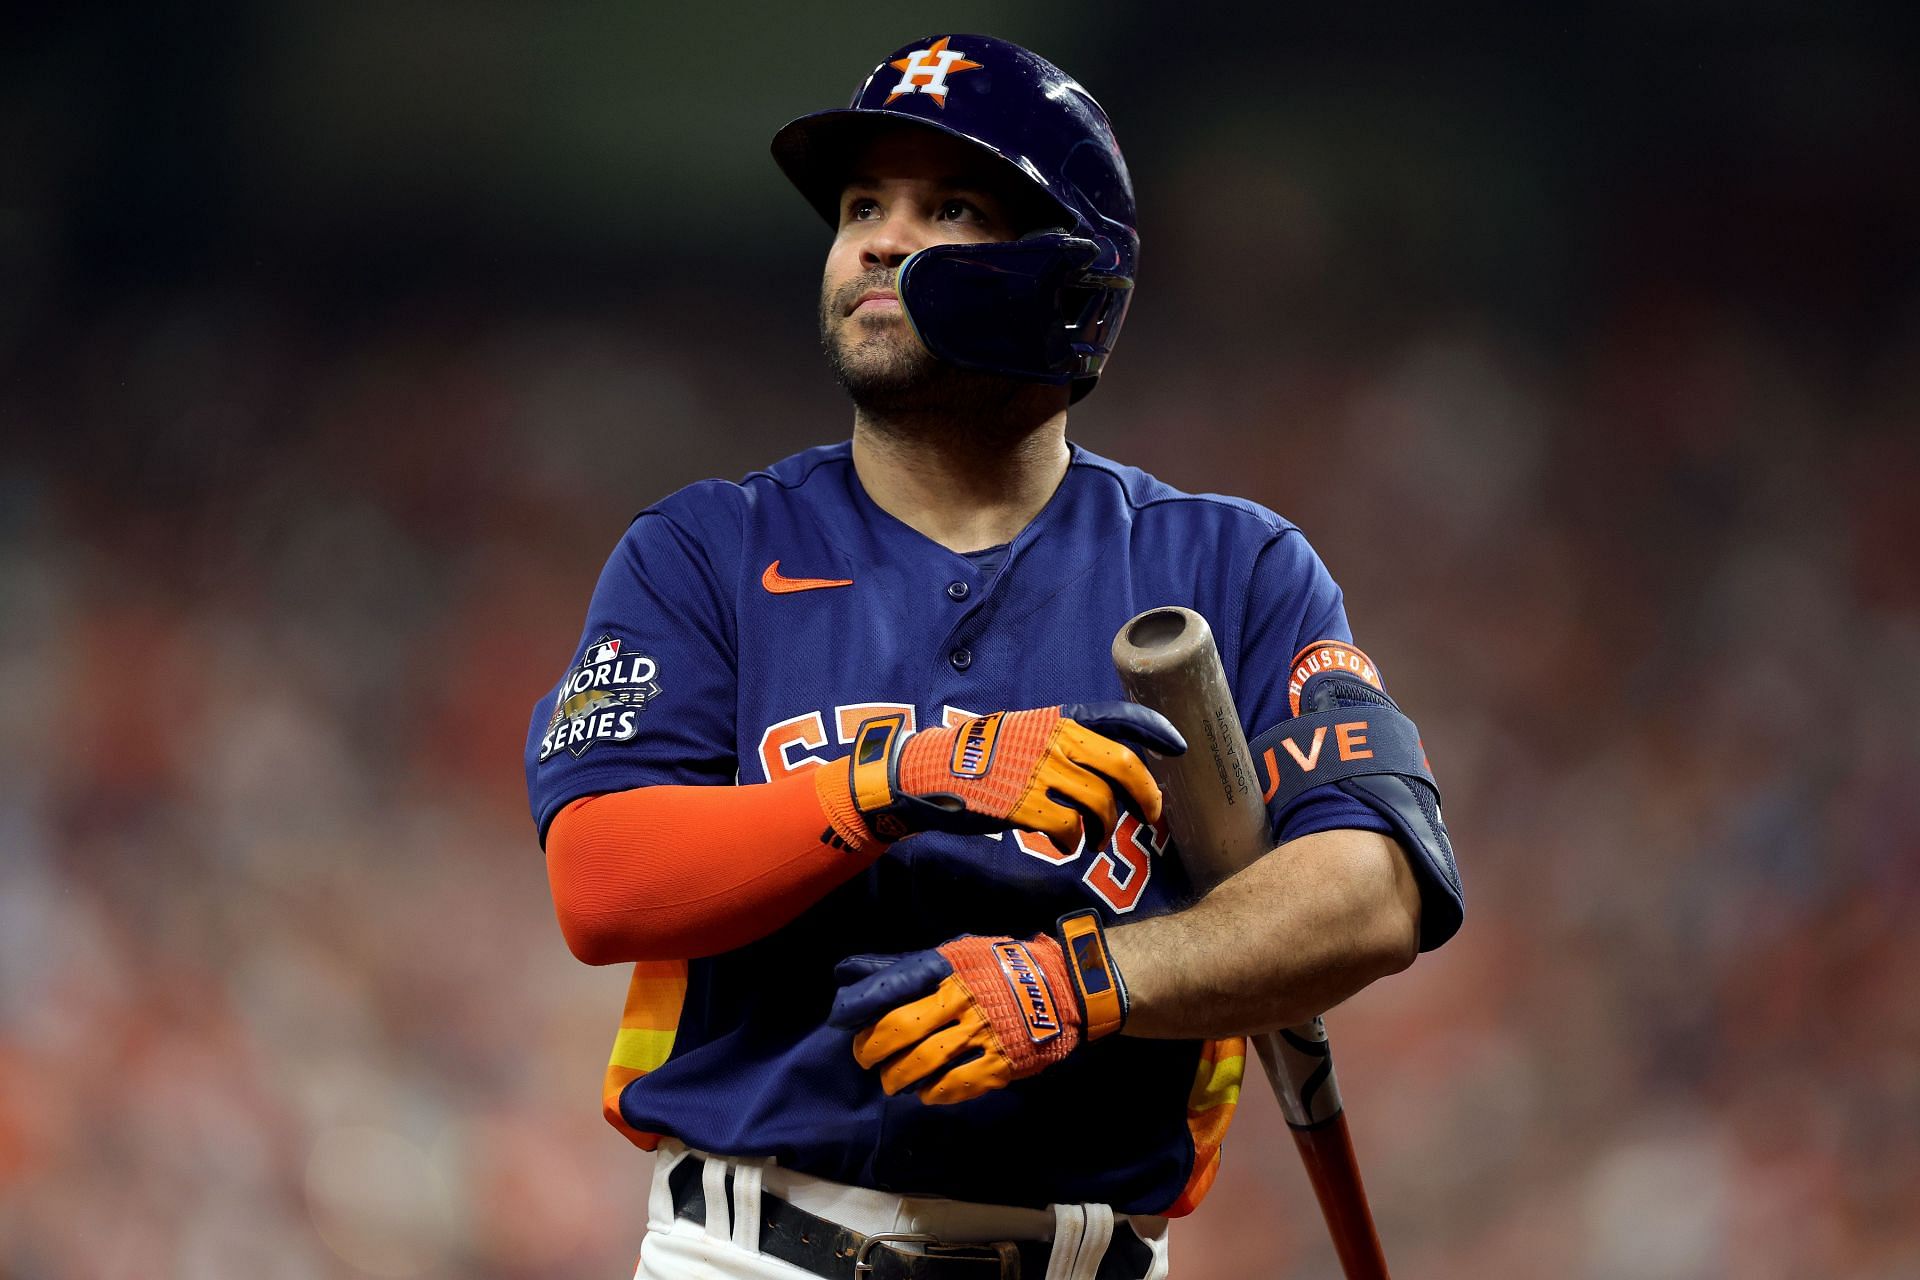 Jose Altuve's penchant for hitting exceeded by his desire to improve and  help Astros win